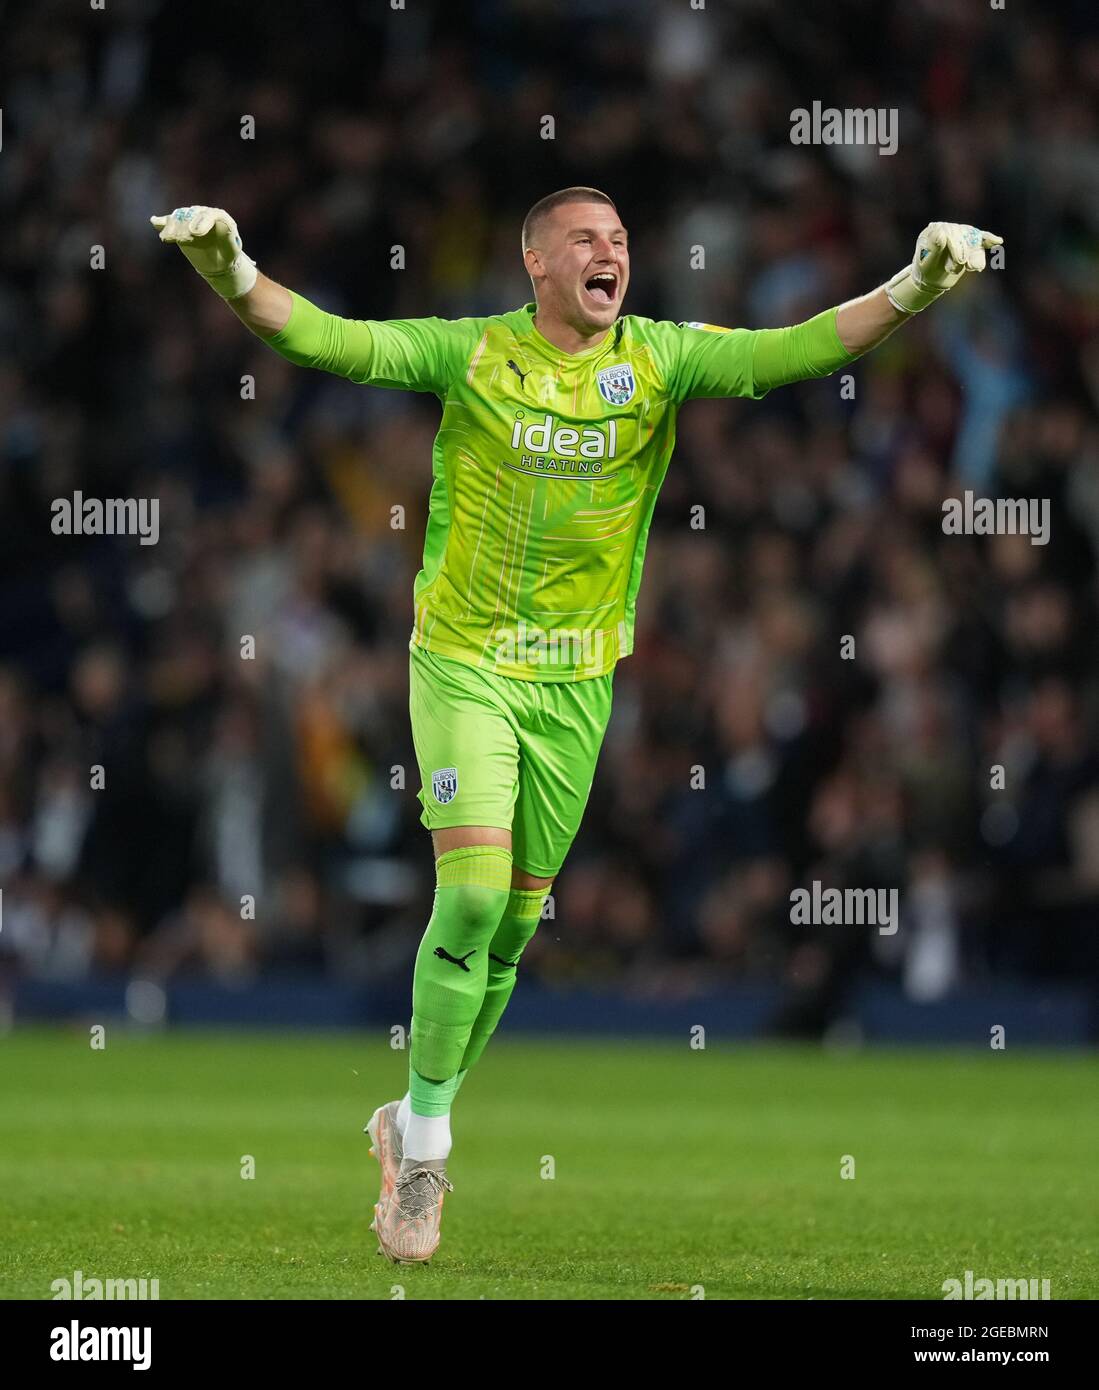 West Bromwich, UK. 18th Aug, 2021. Goalkeeper Sam Johnstone of WBA celebrates his teams goal during the Sky Bet Championship match between West Bromwich Albion and Sheffield United at The Hawthorns, West Bromwich, England on 18 August 2021. Photo by Andy Rowland. Credit: PRiME Media Images/Alamy Live News Stock Photo